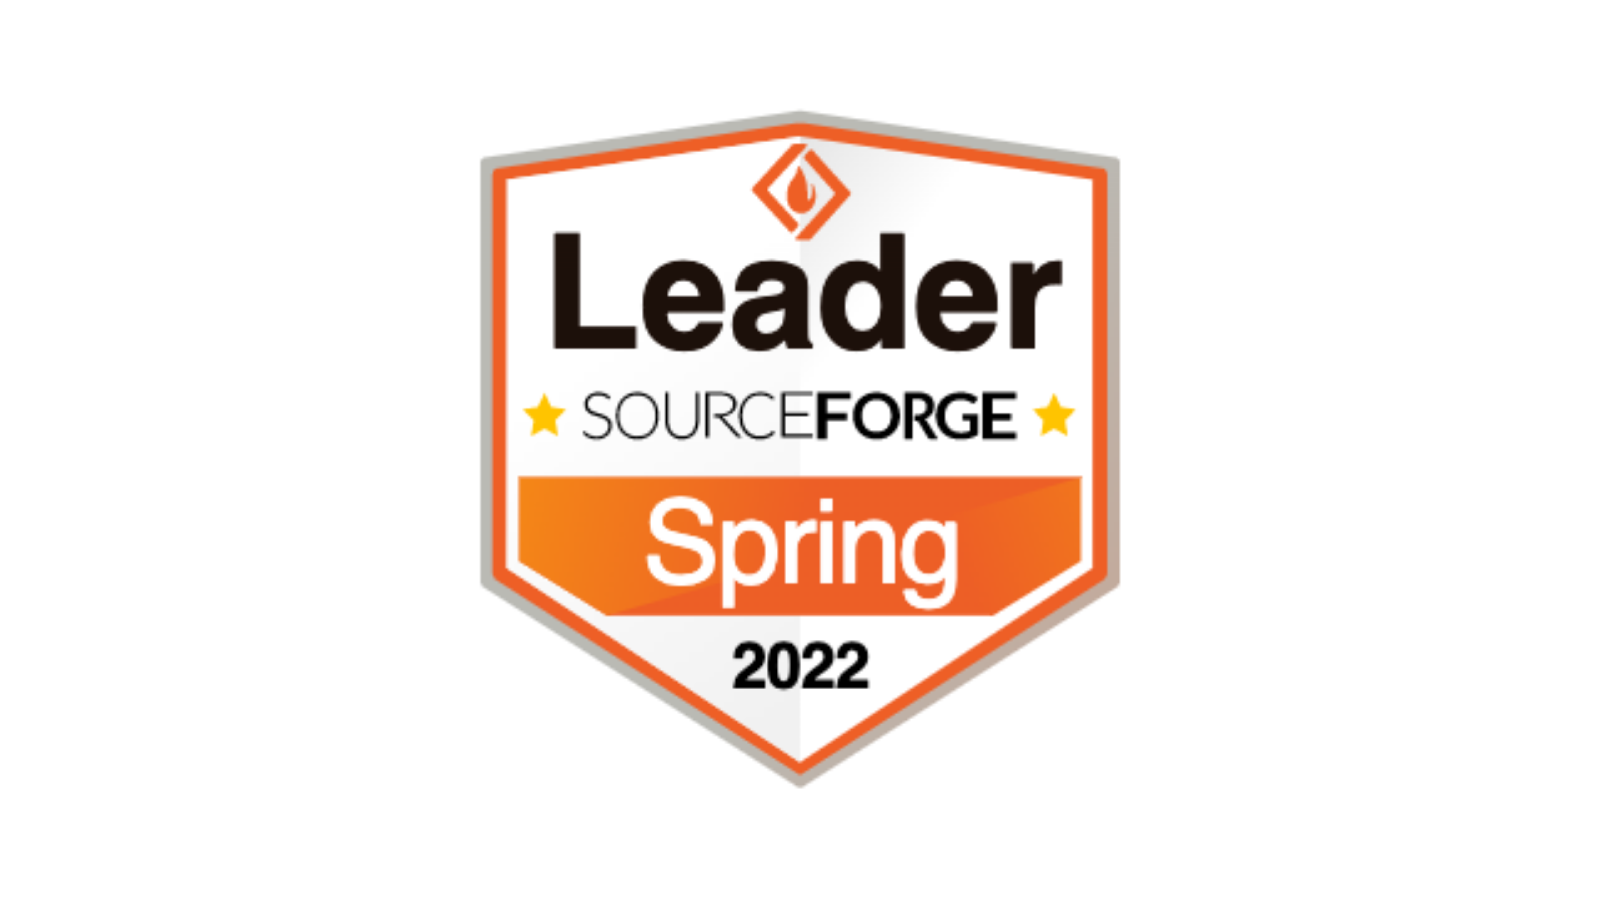 Pikmykid is an award winner of the Leader Sourceforge Spring 2022 award.